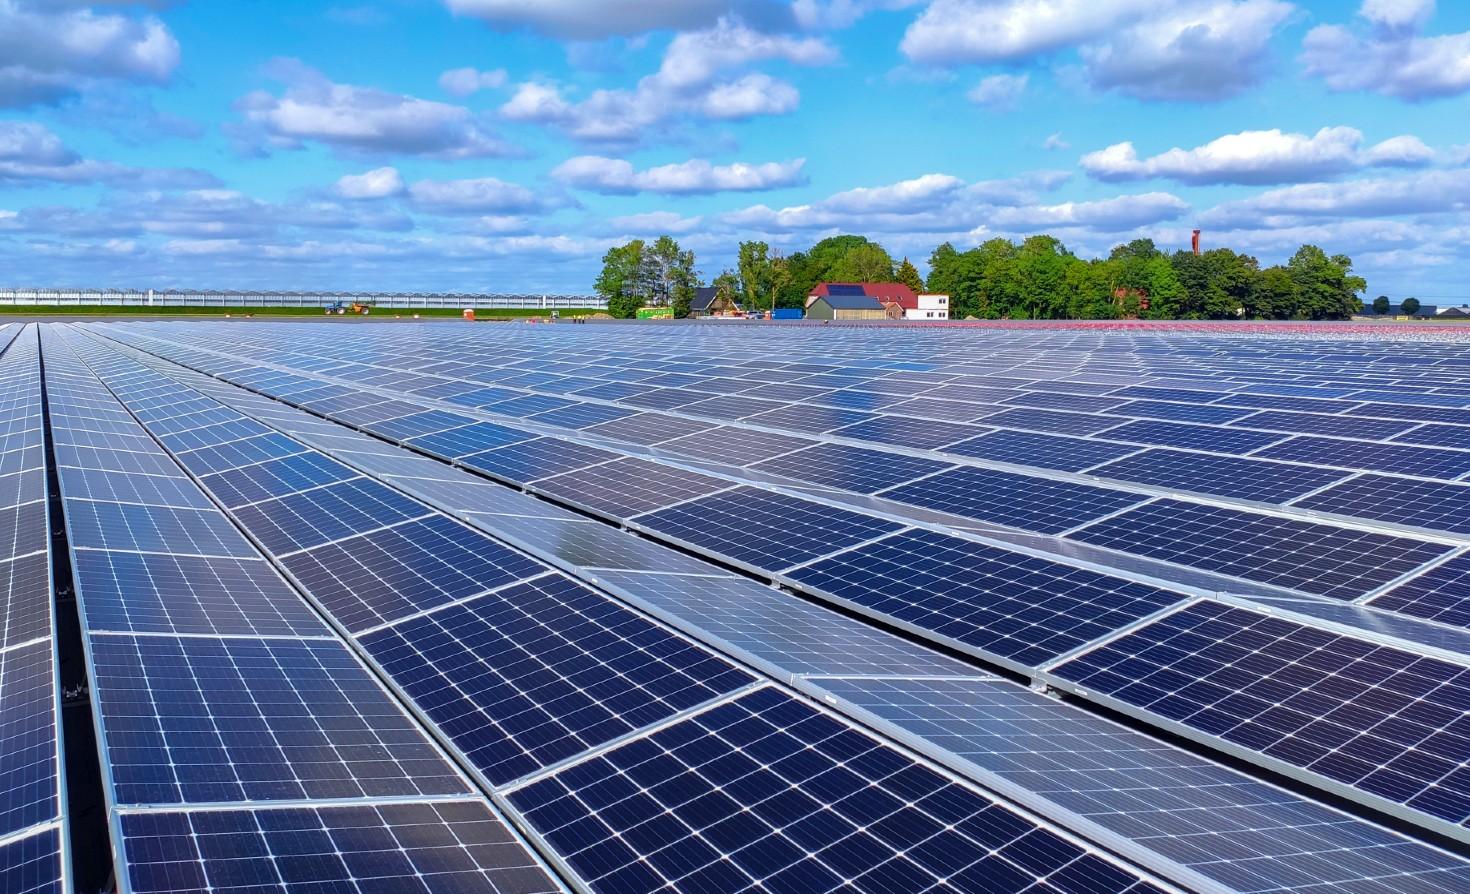 The Hultsfred solar PV project to be the largest in Sweden